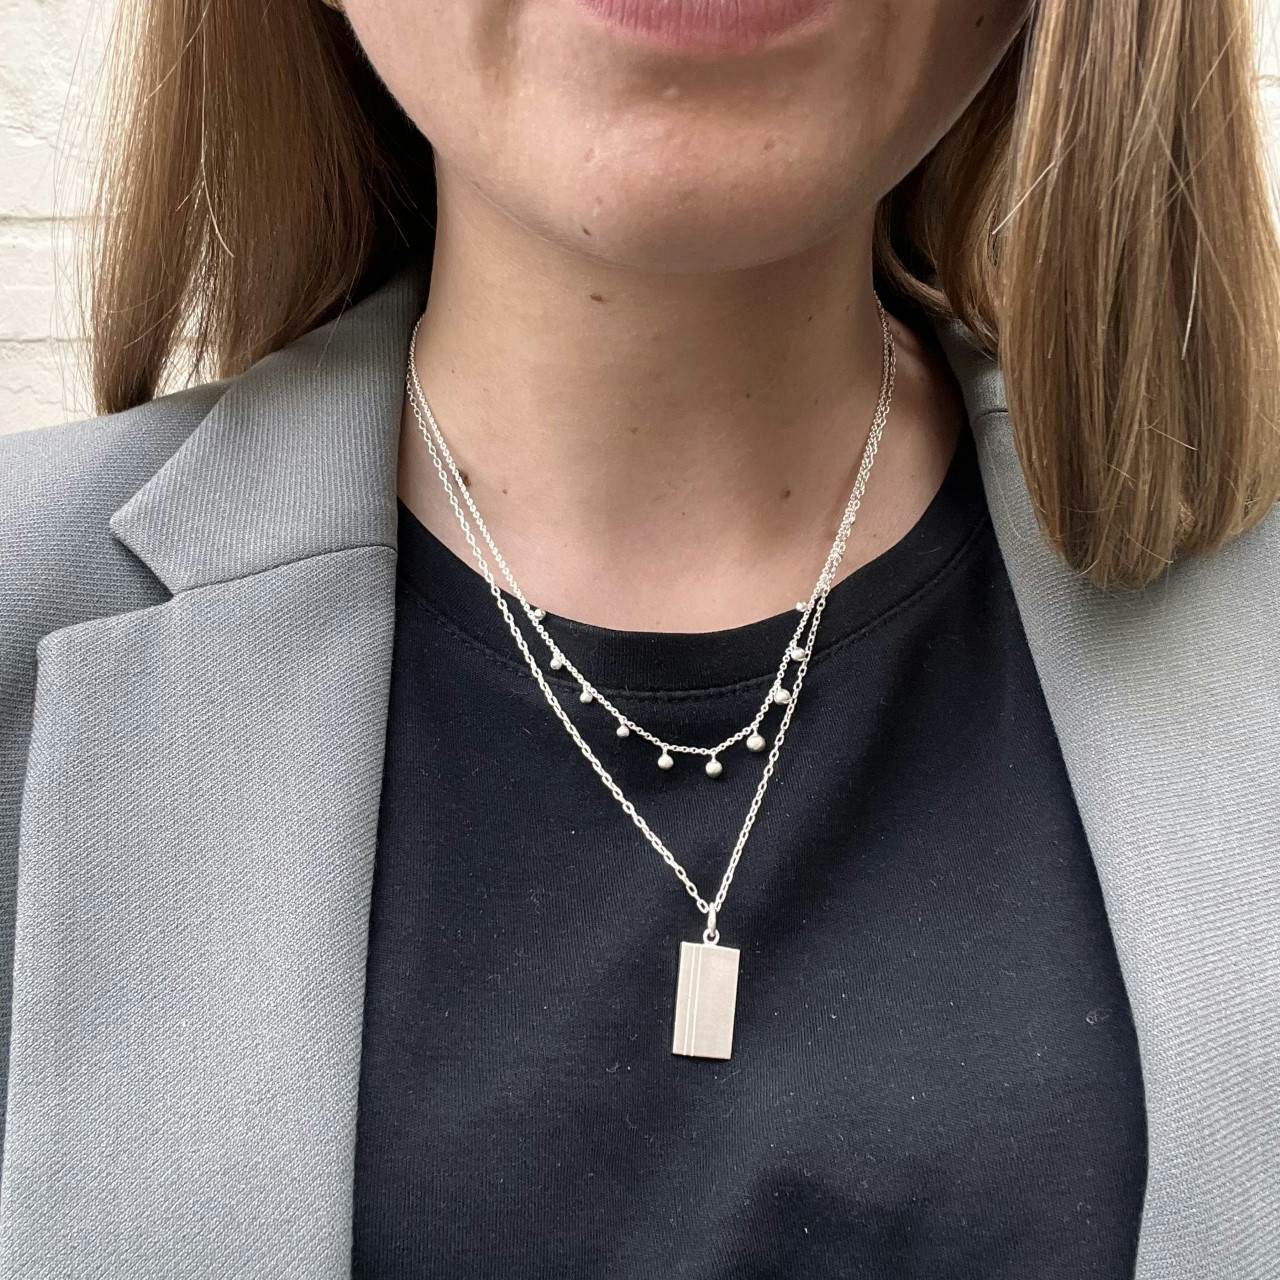 Edge Necklace from Pernille Corydon in Silver Sterling 925